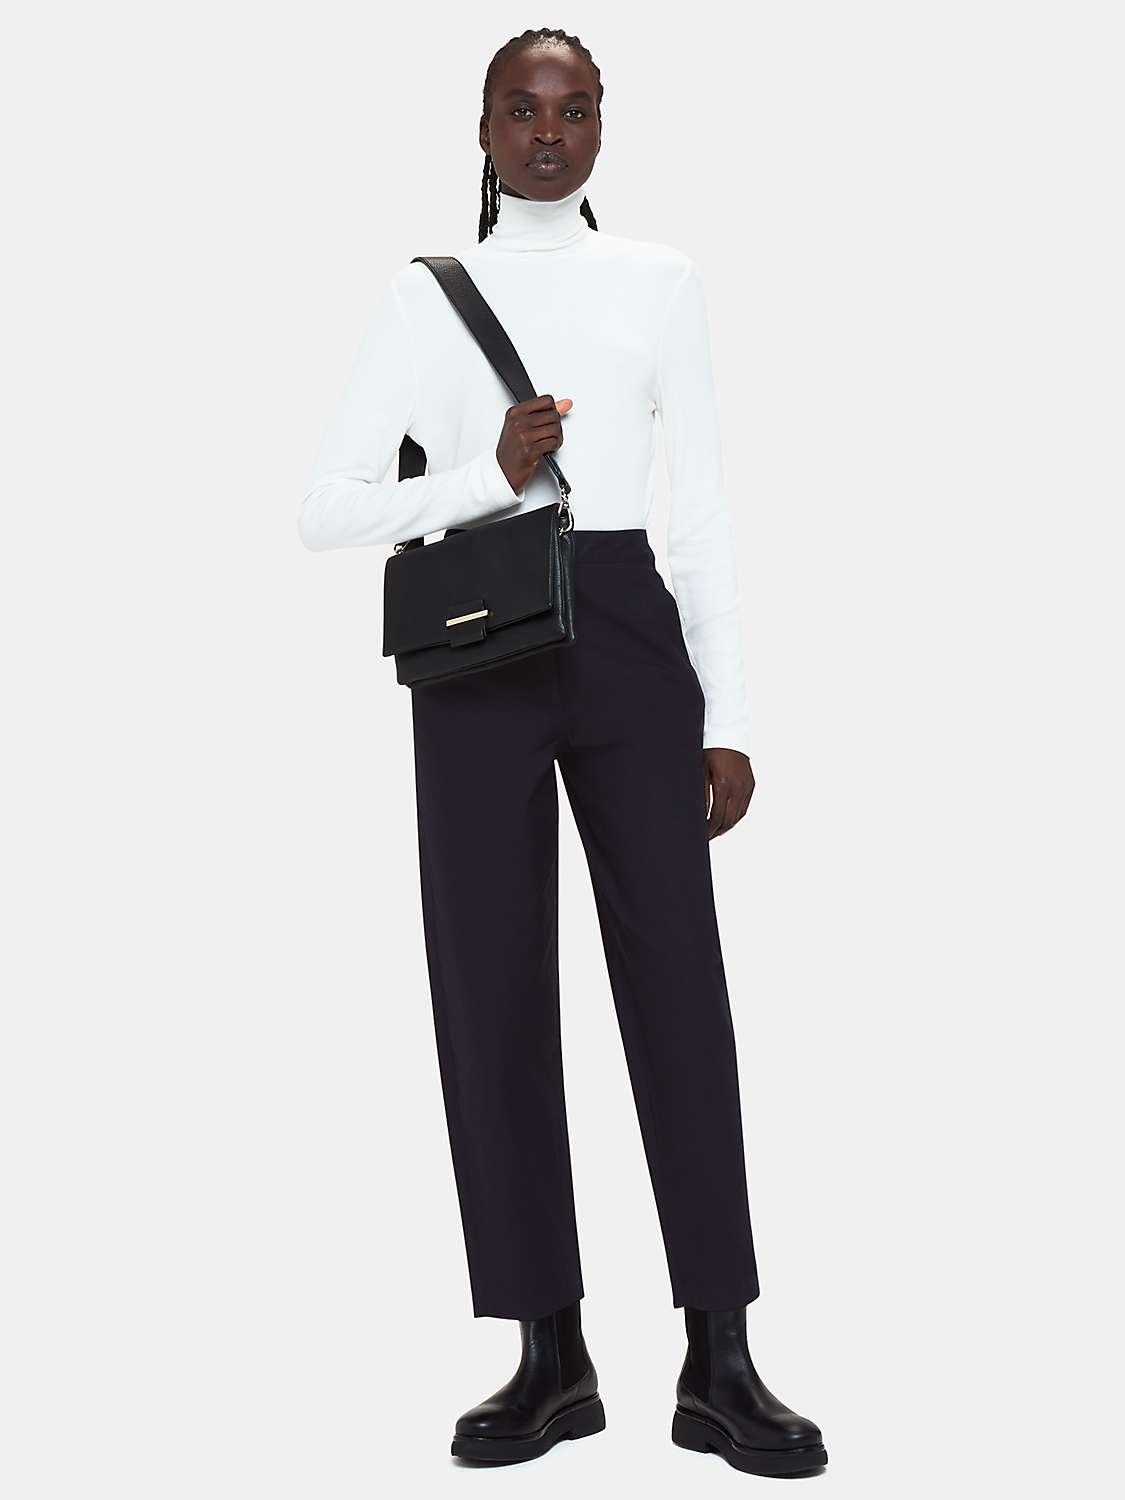 Buy Whistles Carla Barrel Cotton Trousers, Navy Online at johnlewis.com